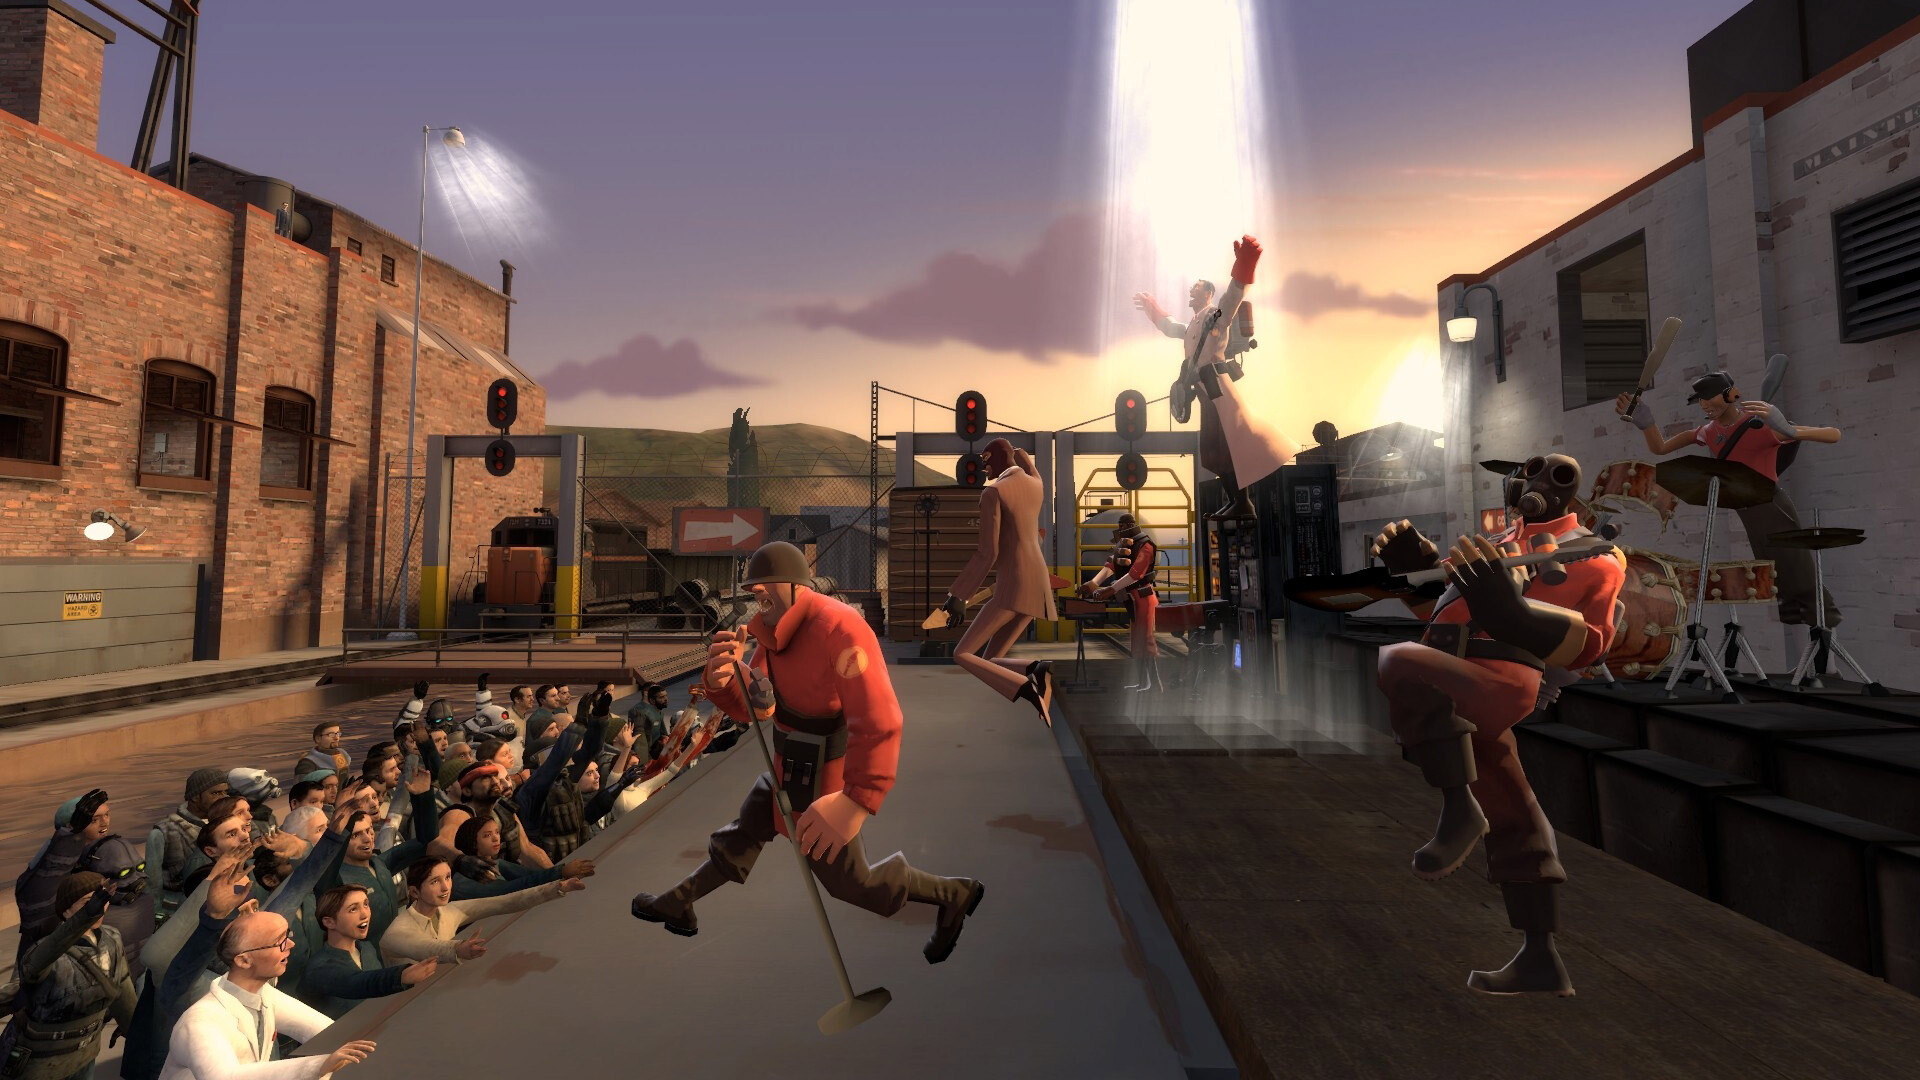 Garry's Mod: Amateur concert performed by Team Fortress 2 characters for the public from Half-Life 2, Source Engine. 1920x1080 Full HD Wallpaper.